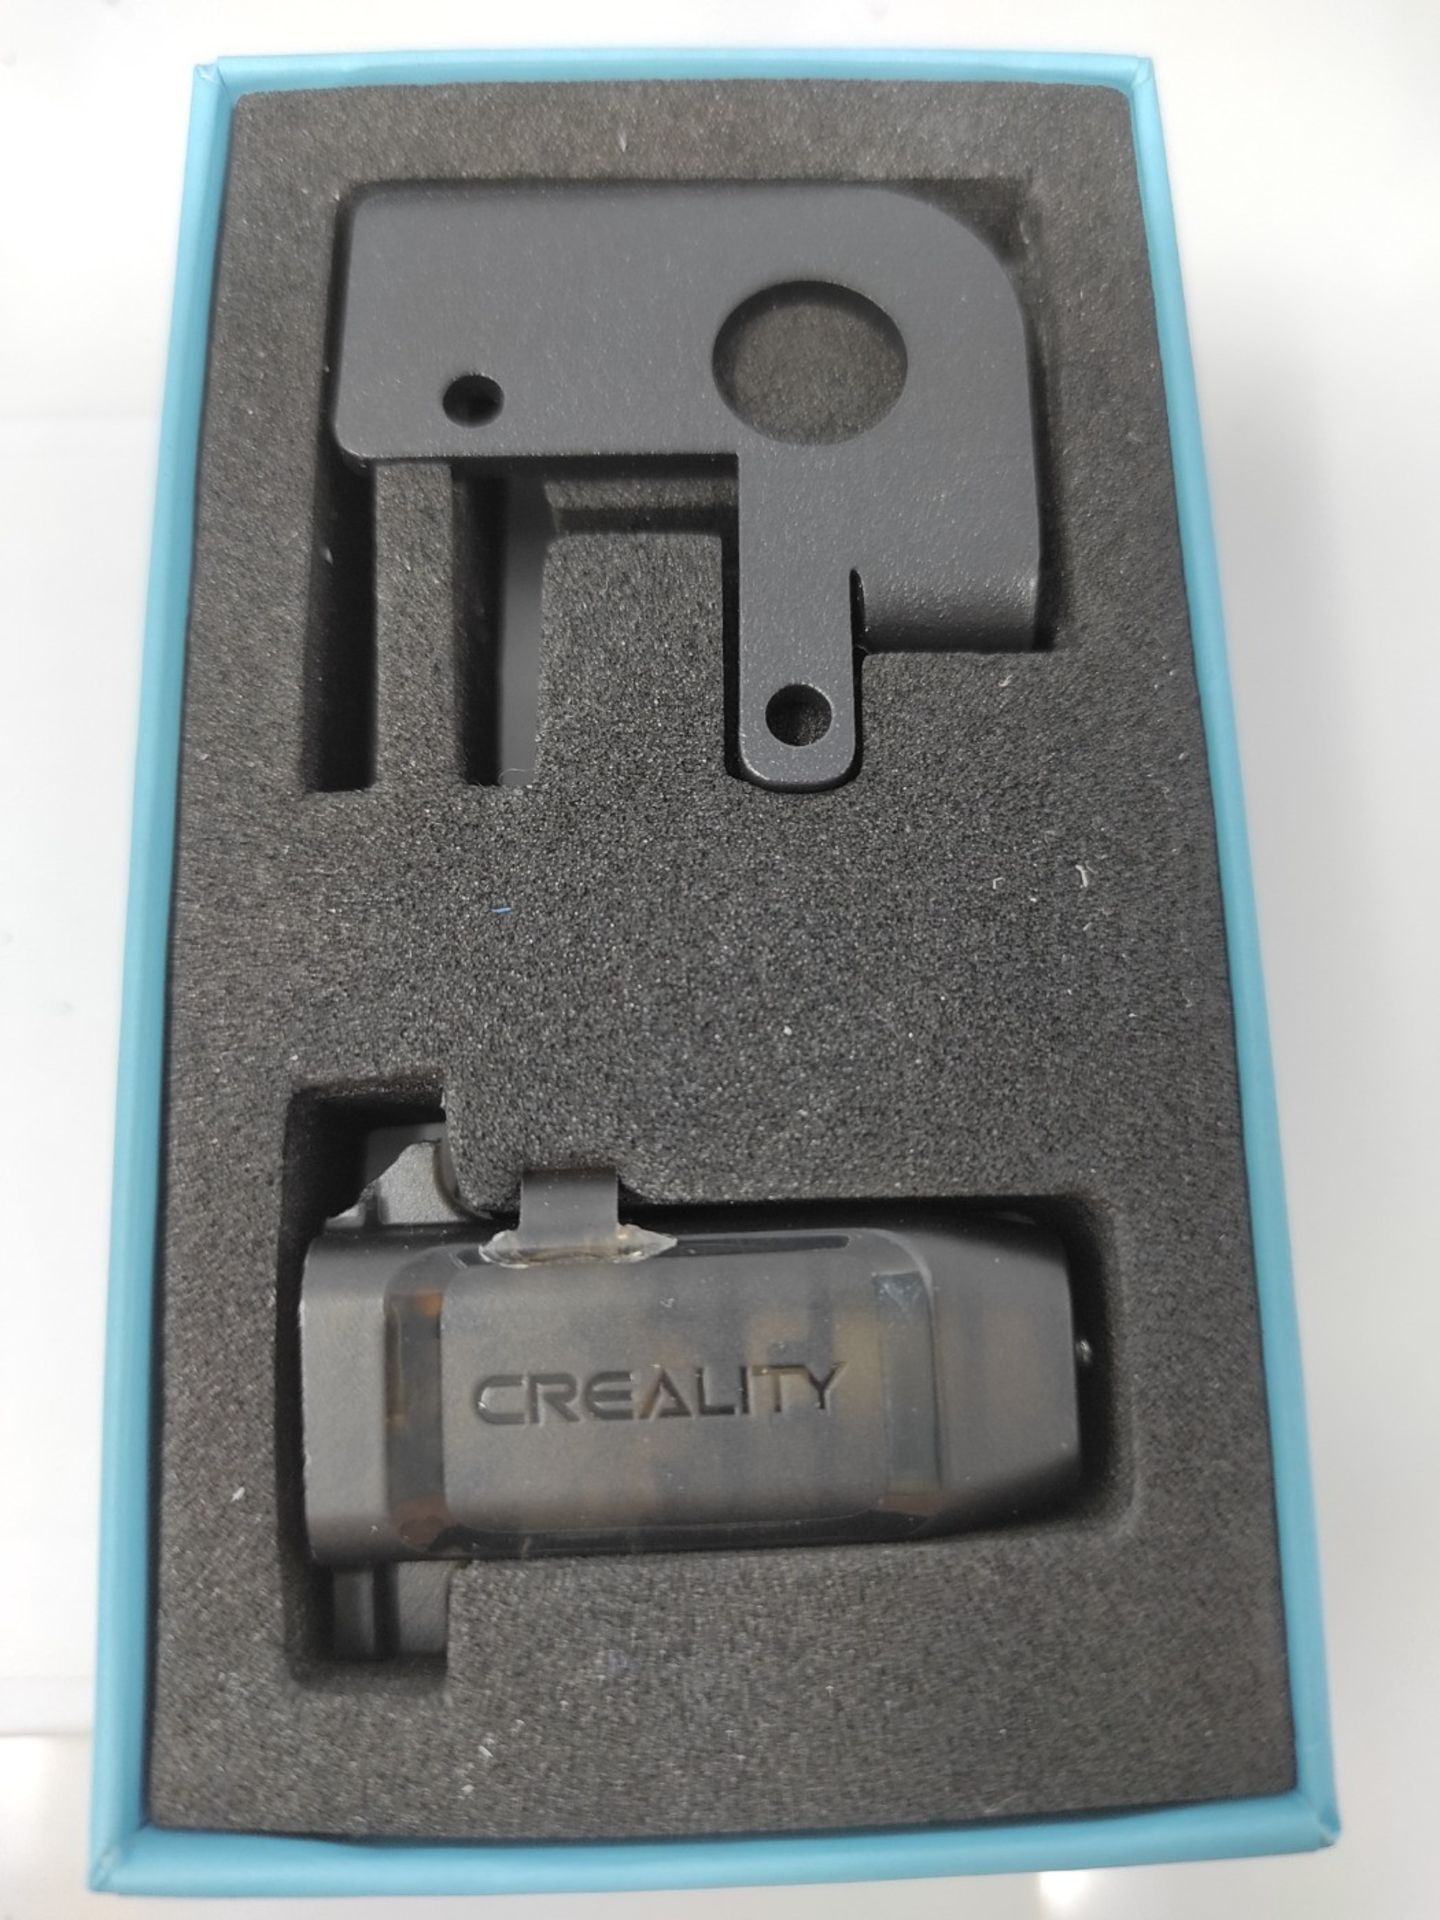 Creality Original Upgrade CR Touch kit 3D Printer Auto Bed Leveling Sensor Compatible - Image 3 of 3